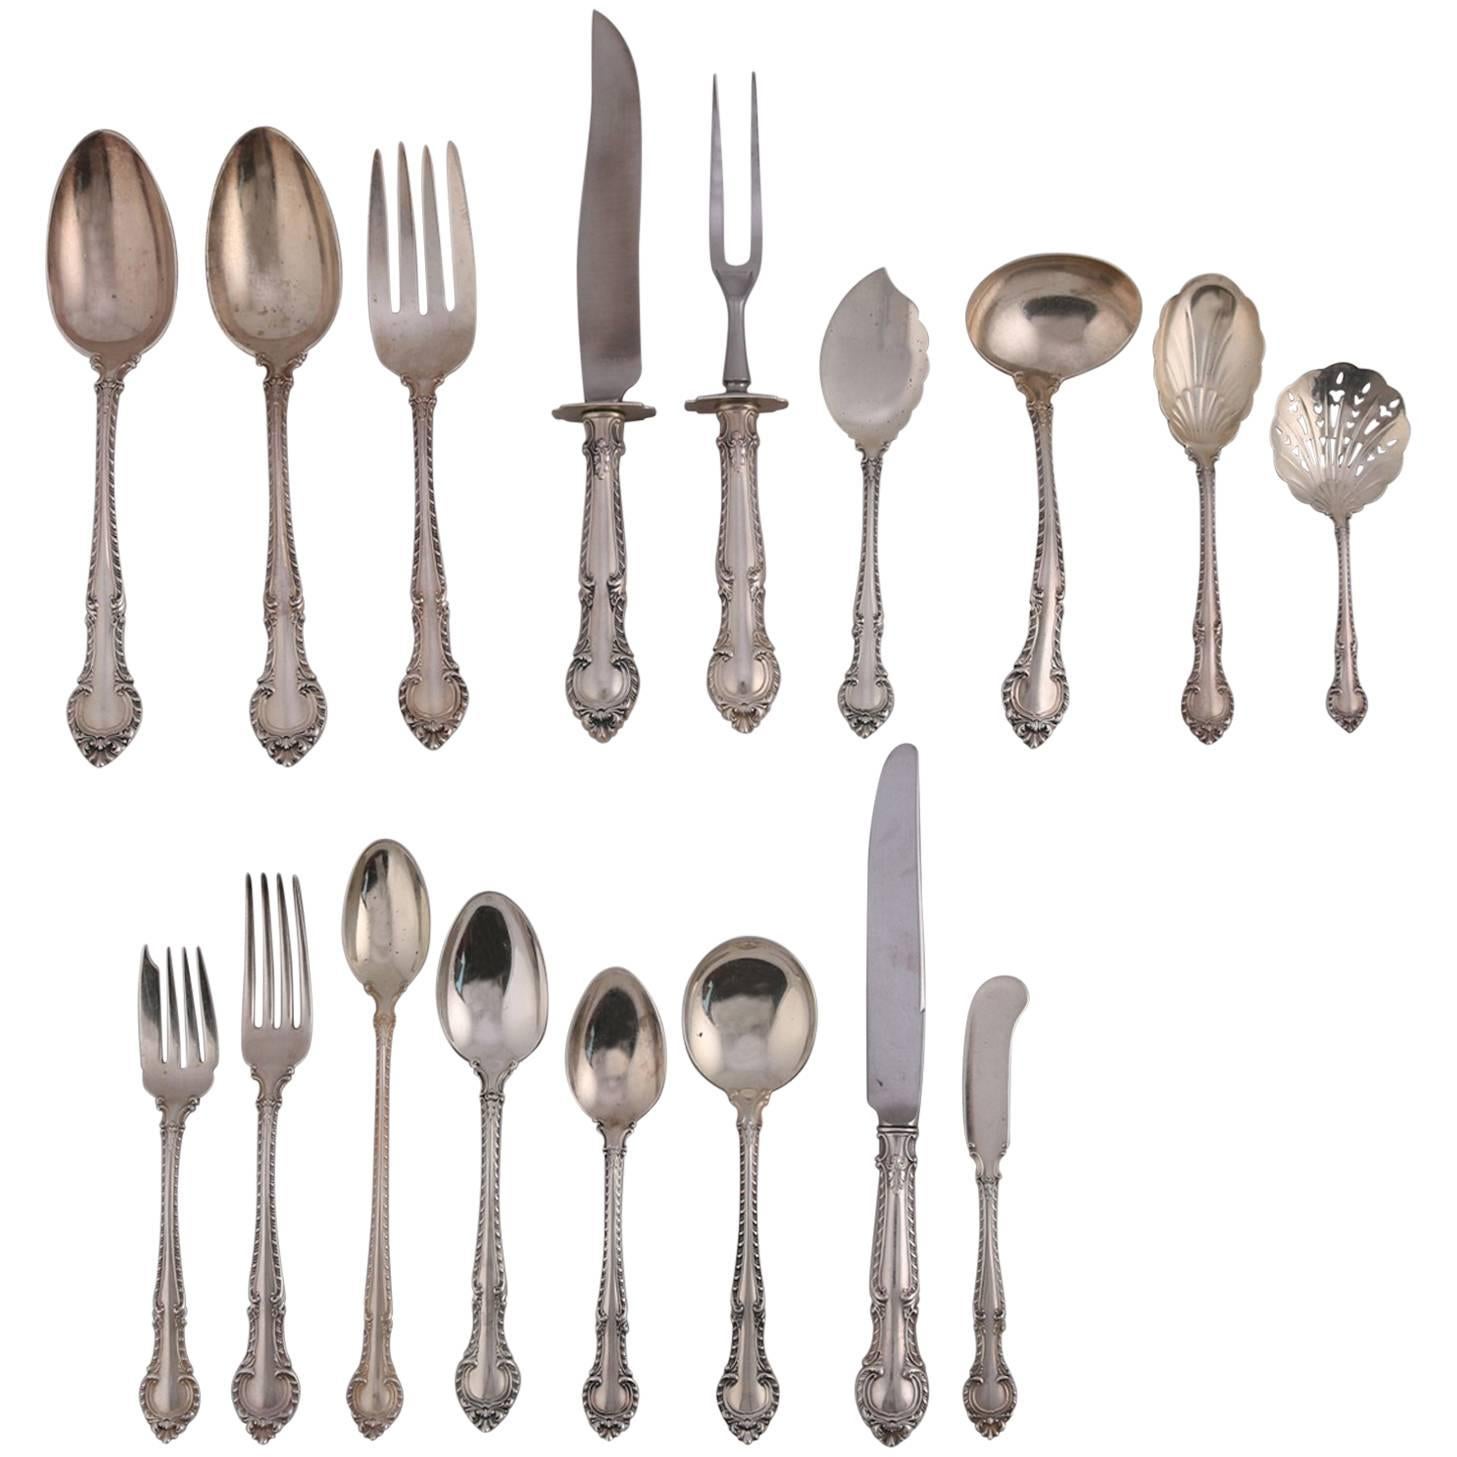 91 Pc Set Sterling Silver Flatware "English Gadroon" by Gorham, 20th Century